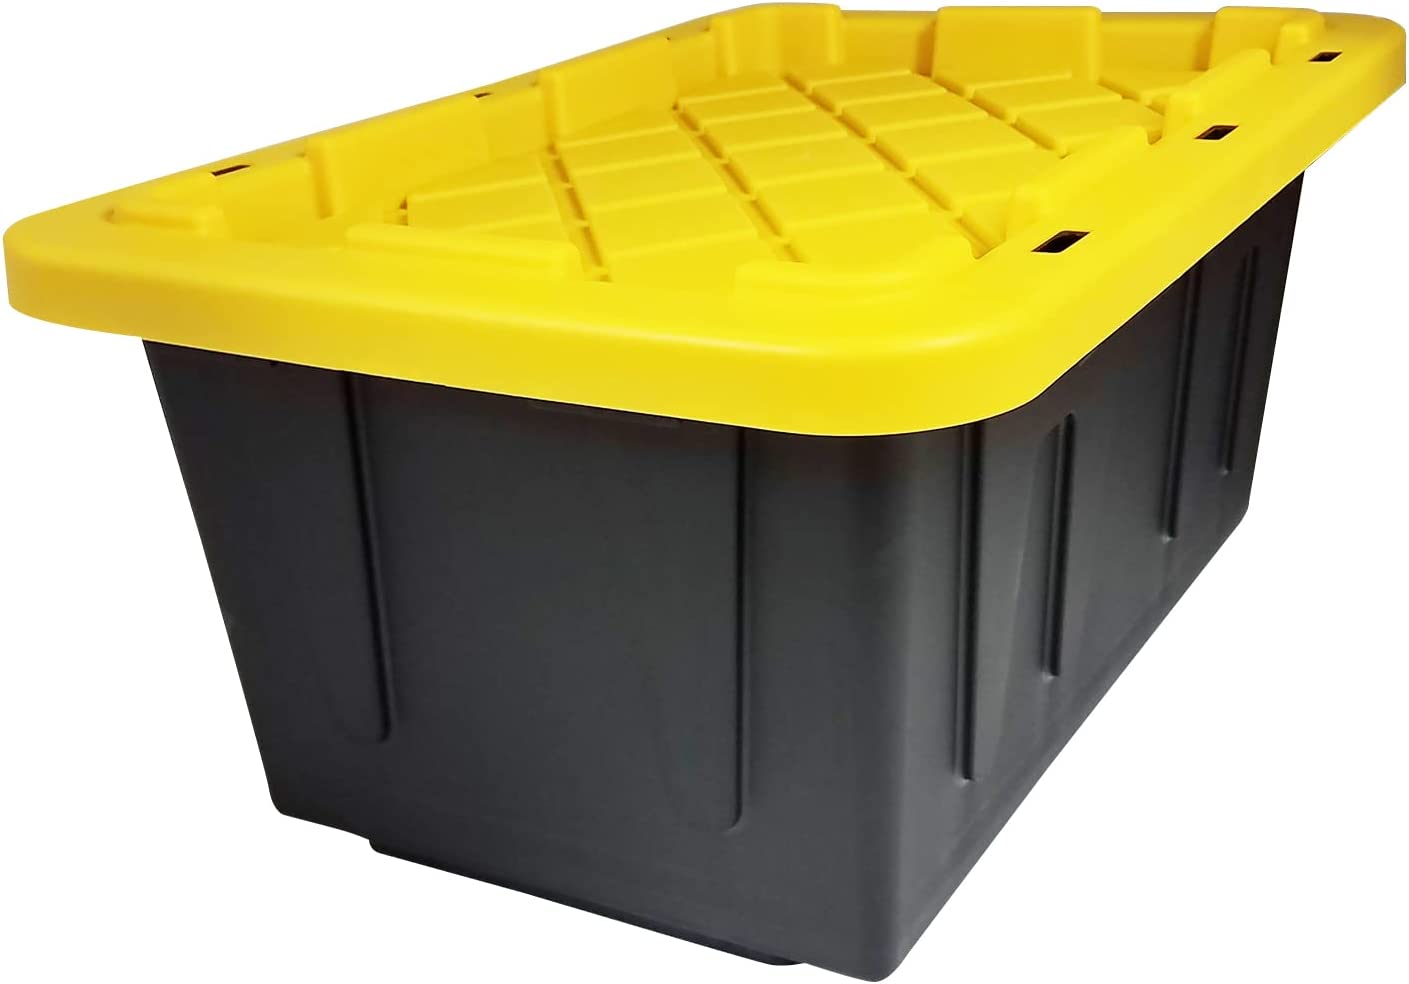 https://bigbigmart.com/wp-content/uploads/2023/06/HOMZ-15-Gallon-Durabilt-Storage-Bins-Pack-of-2-Heavy-Duty-Plastic-Containers-Secure-Snap-Lids-6-Hasp-Areas-for-Tie-Down-Straps-or-Locks-Stackable-Nestable-Organizing-Totes1.jpg